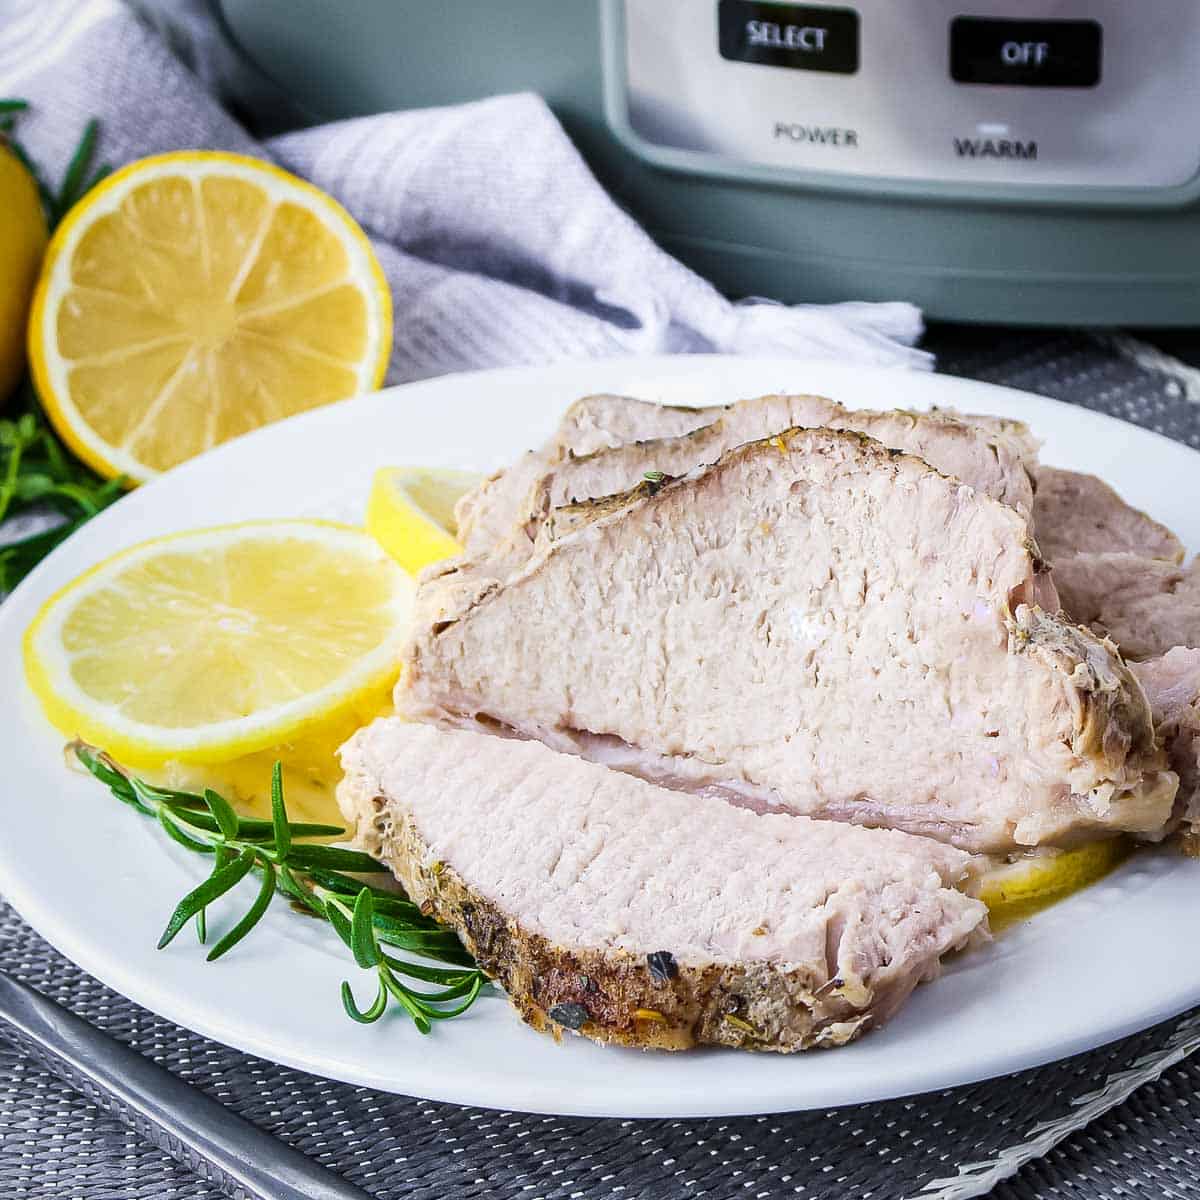 Side shot of slices of pork on a white plate with thyme and lemon slices on the side and the crock pot in the background.